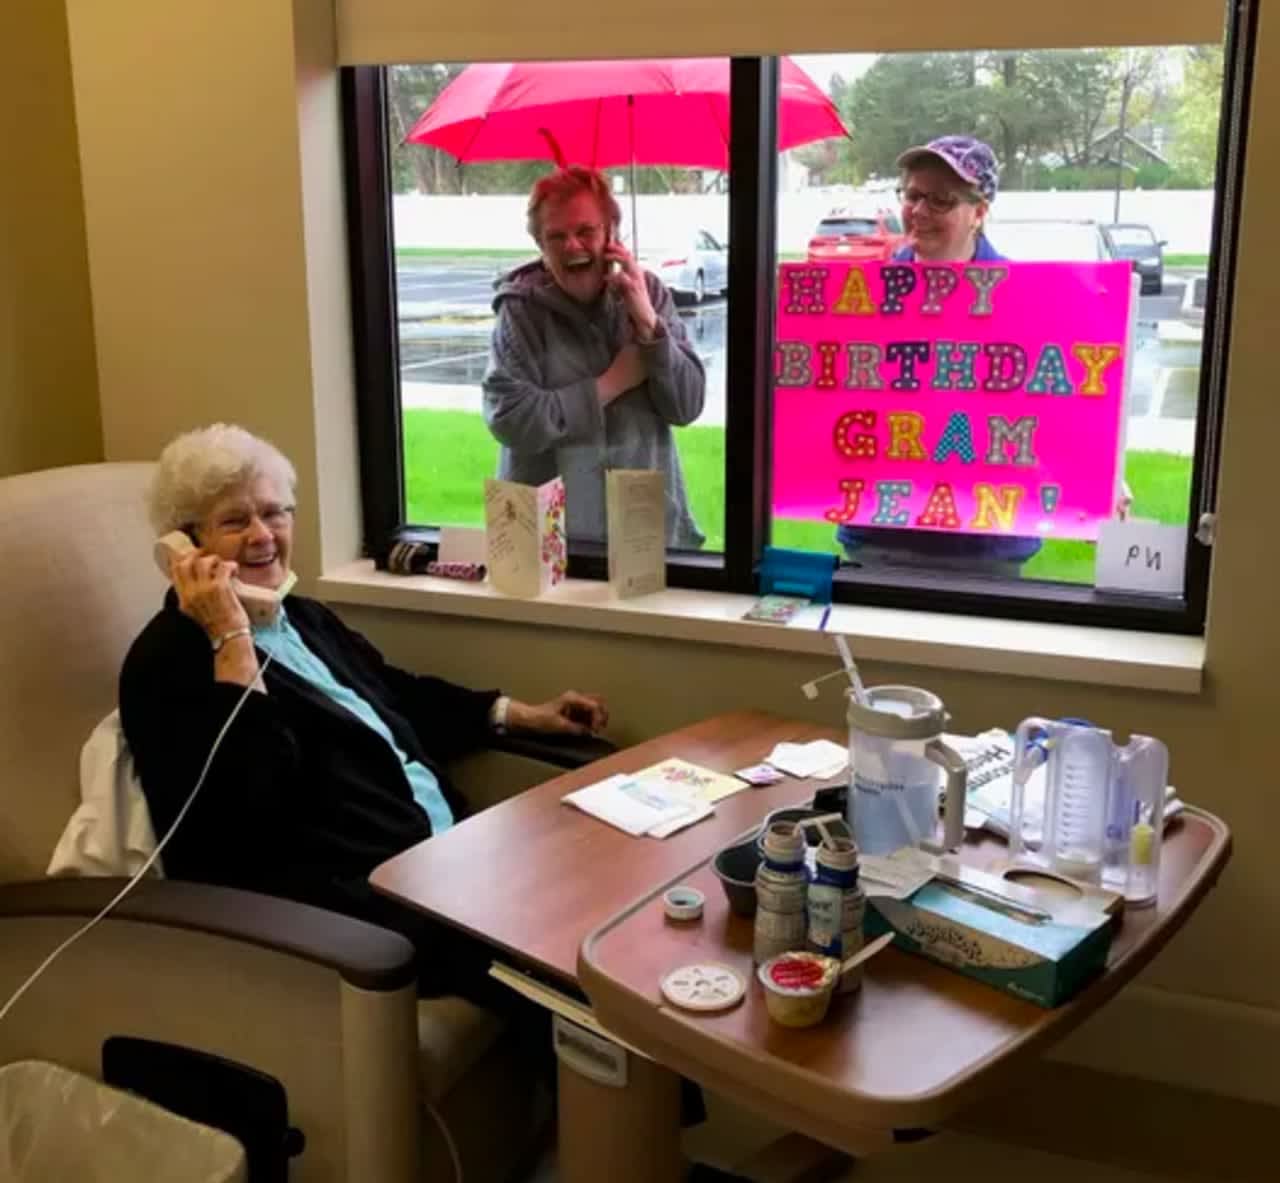 Jean Powell (seated, on phone) speaks with daughter Kim Wedemeyer (top left) and granddaugther Shaylin Bell (top right) on her 91st birthday, after beating COVID-19 (Photo: Encompass Health Rehabilitation Hospital of Toms River)